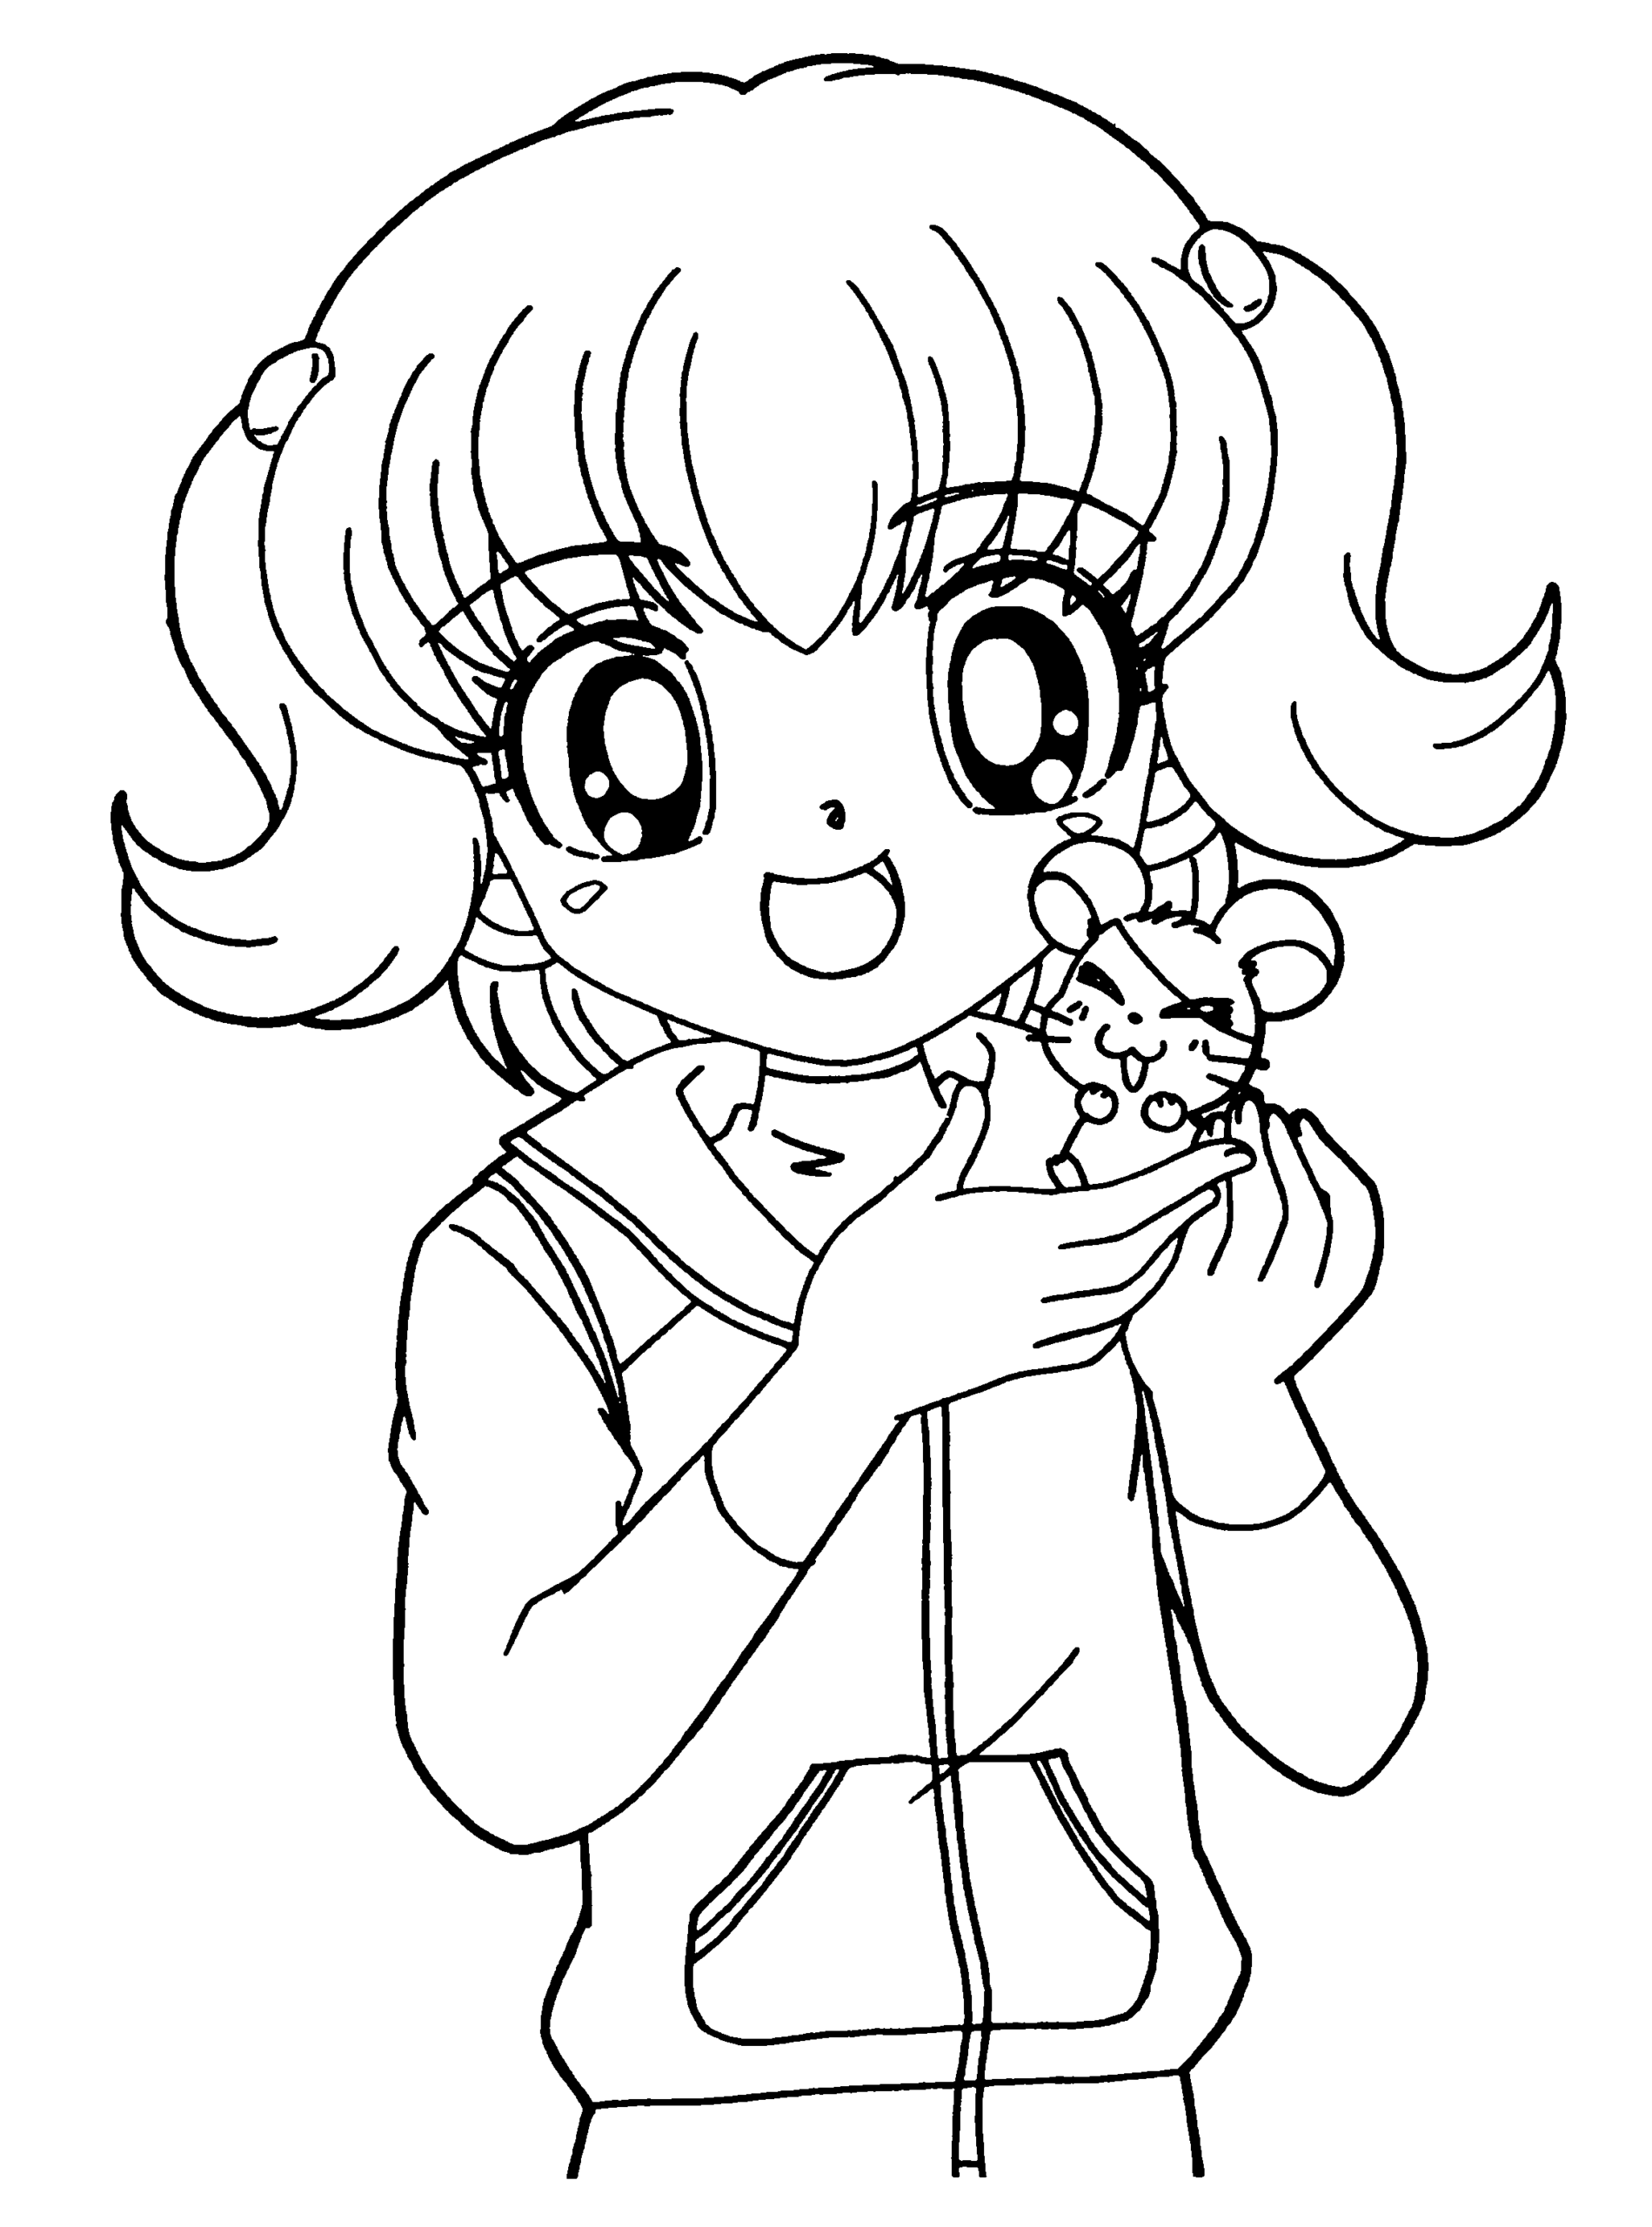 Girl Coloring Pages For Girls Cute Anime Girl Printable 2021 0539 Coloring4free Coloring4free Com - beautiful cute roblox girl coloring pages